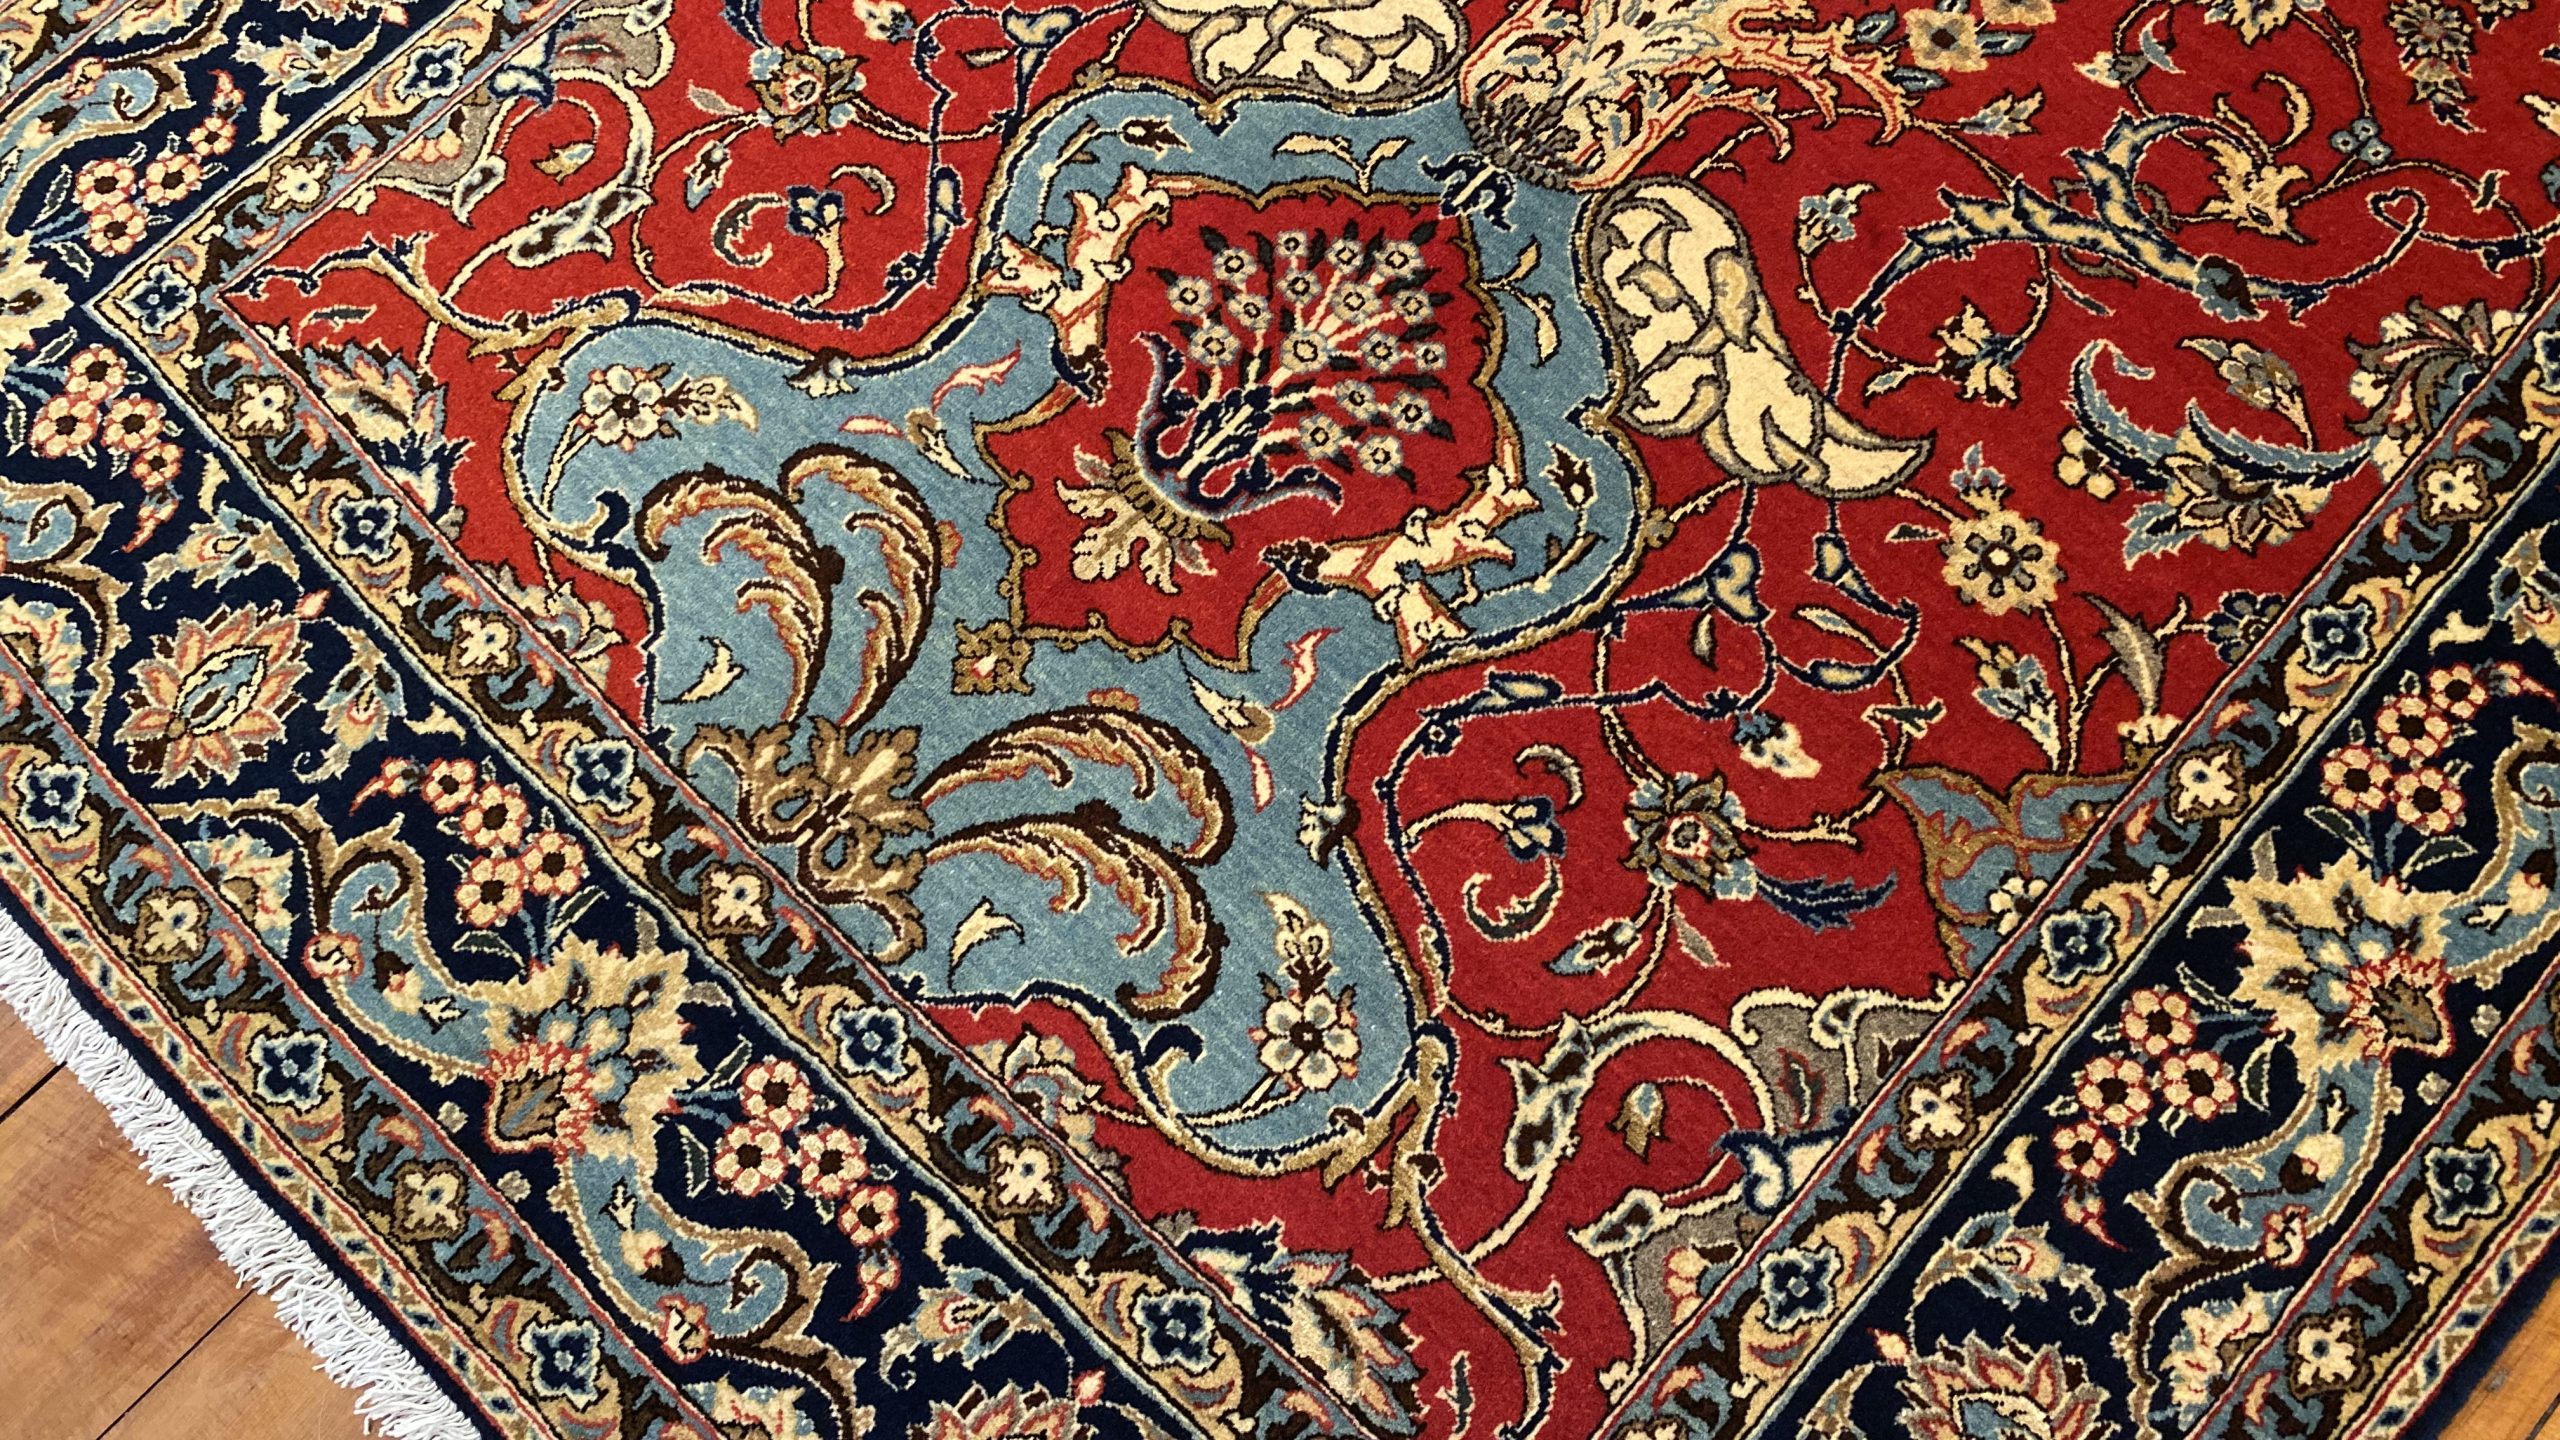 Rug# 5852, vintage Qum wool pile, circa 1945, silk inlay, immaculate, Persia, size 210x140 cm, RRP $8000 , on special $3000 (4)